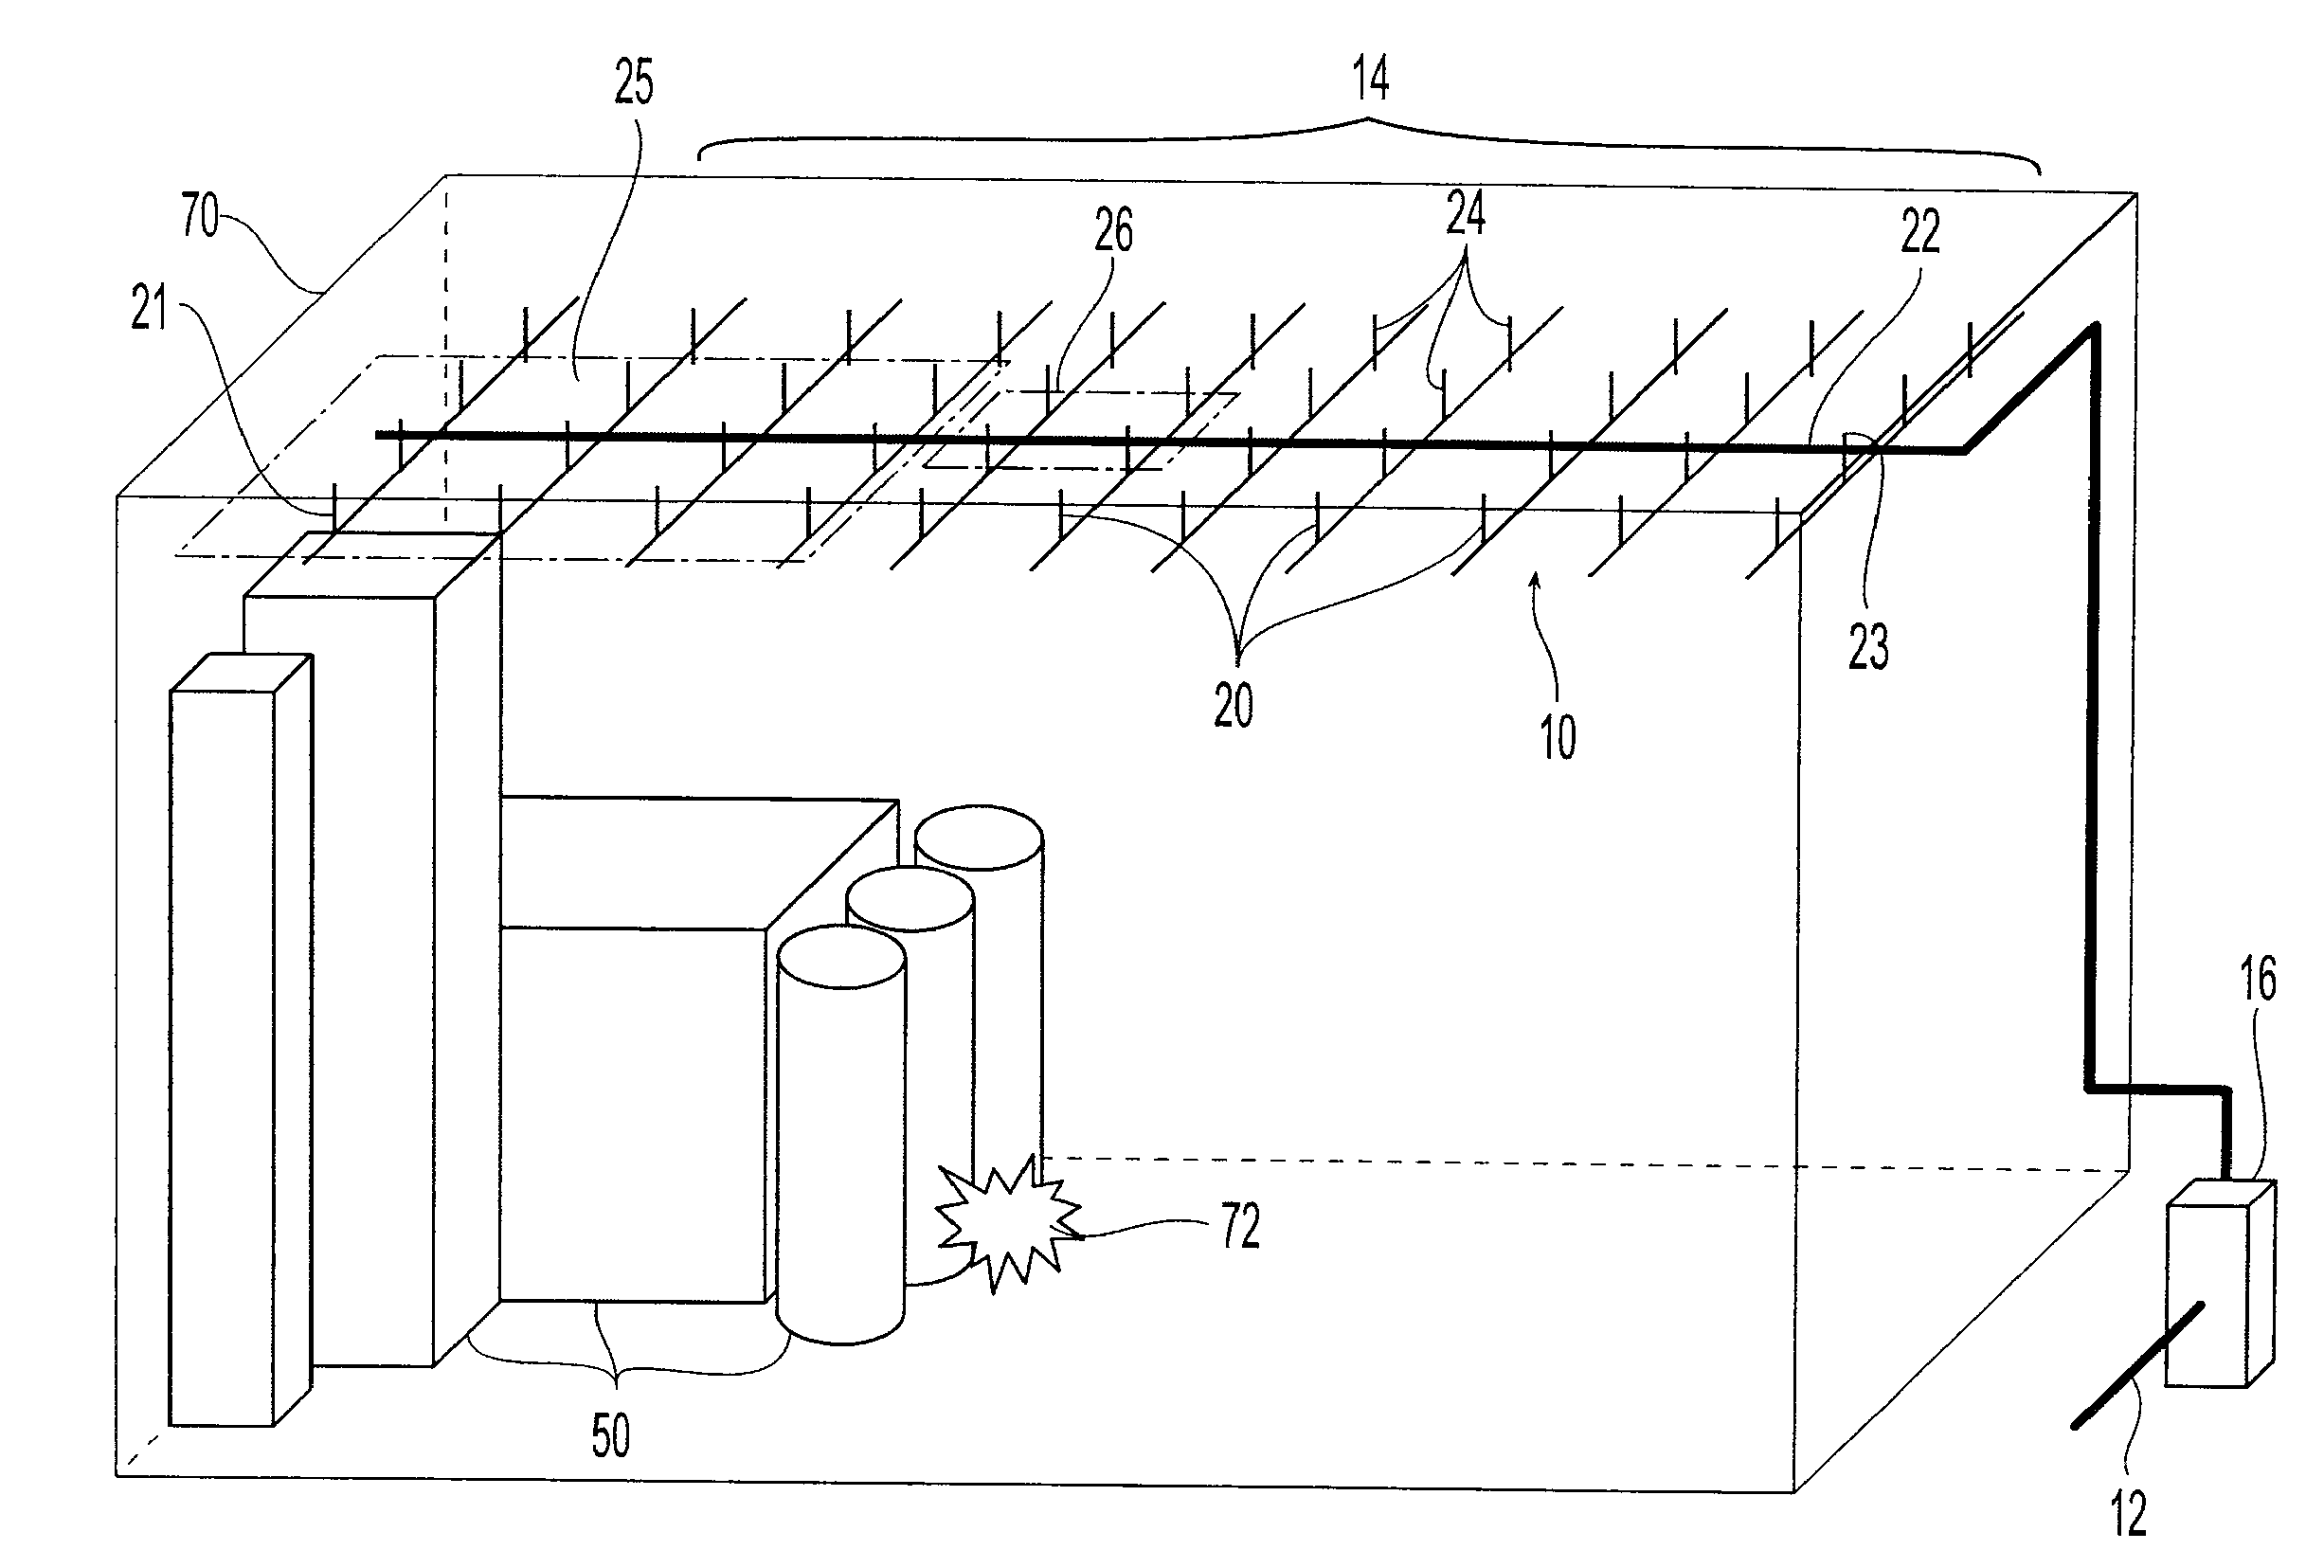 Ceiling-only dry sprinkler systems and methods for addressing a storage occupancy fire